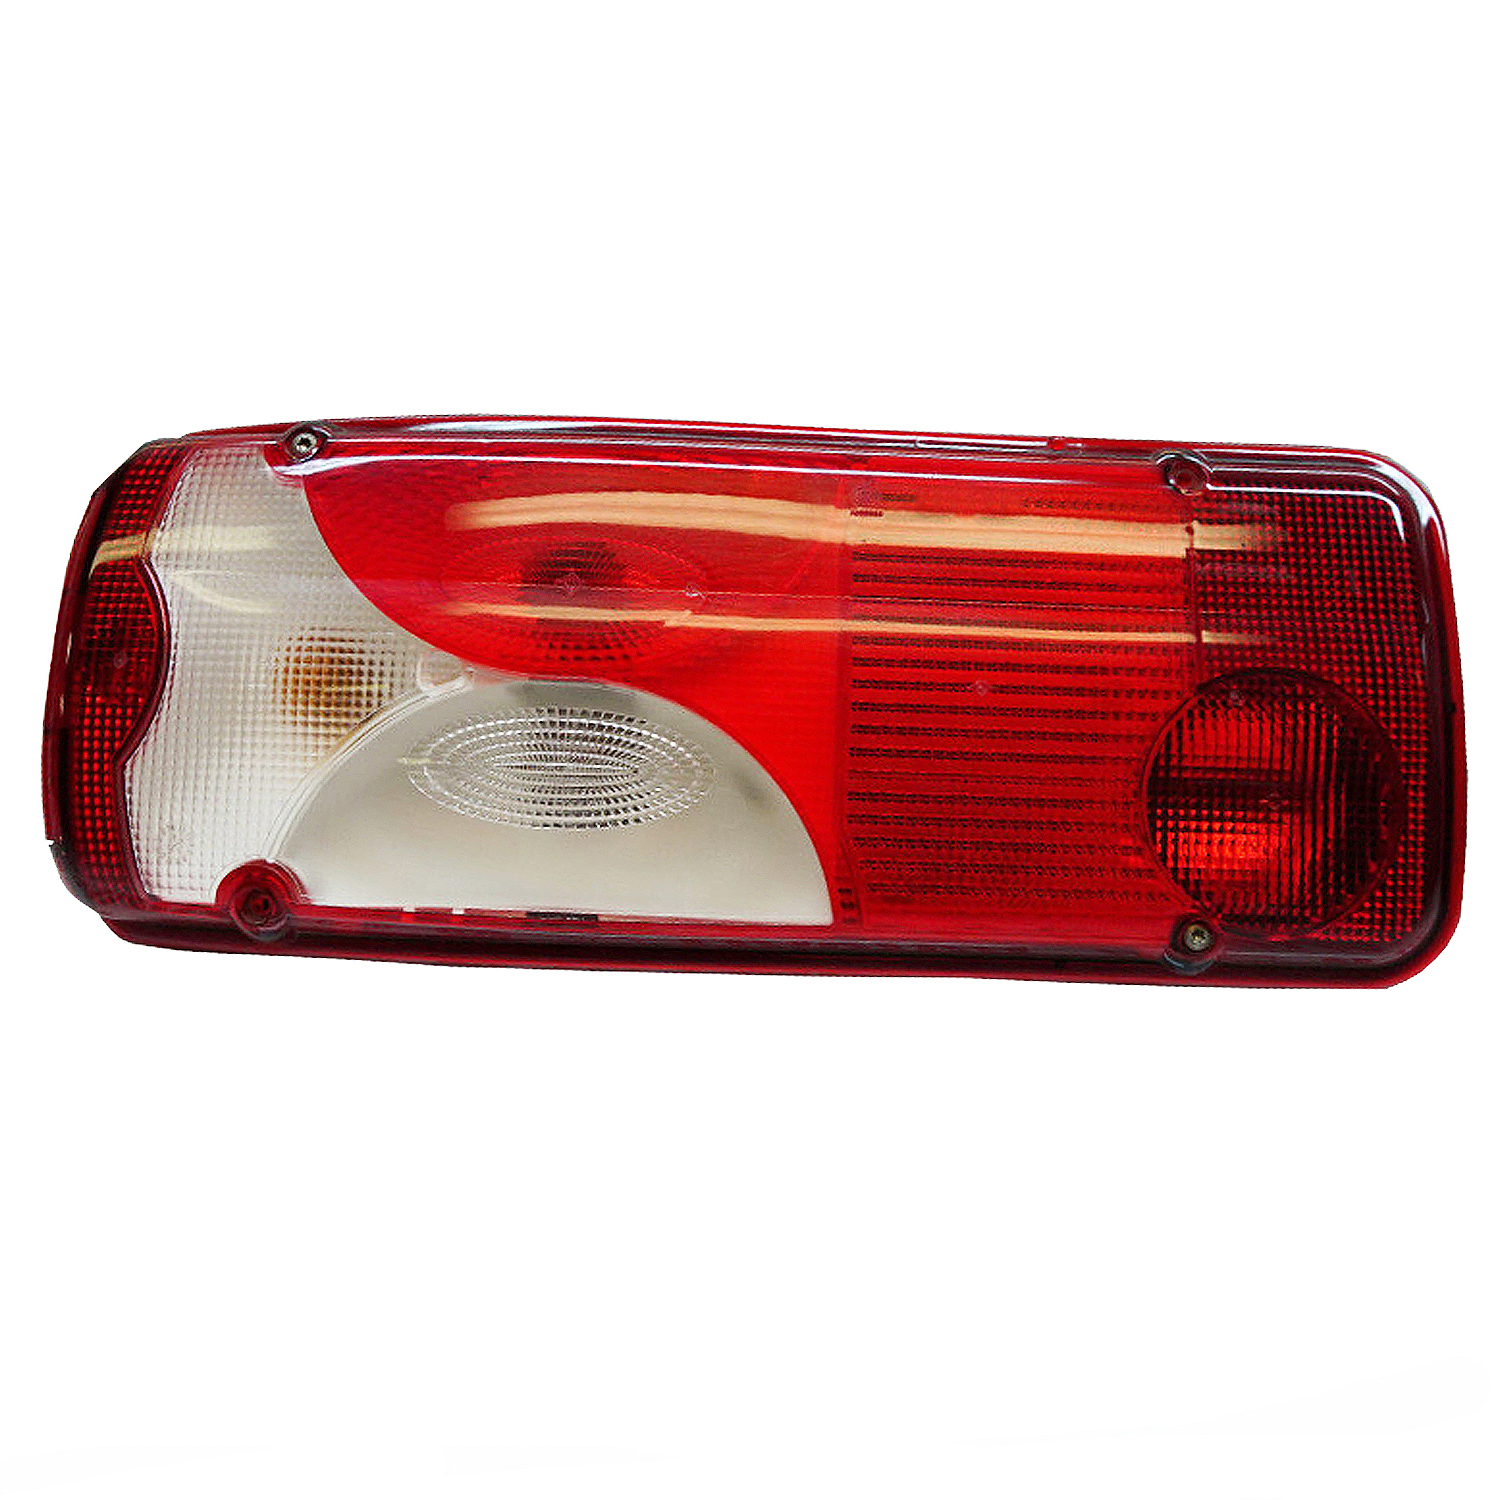 Mercedes Sprinter CHASSIS CAB VAN REAR LAMP LIGHT RIGHT HAND ( UK Driver Side ) 2012 to 2017 – TAIL LAMP LENS